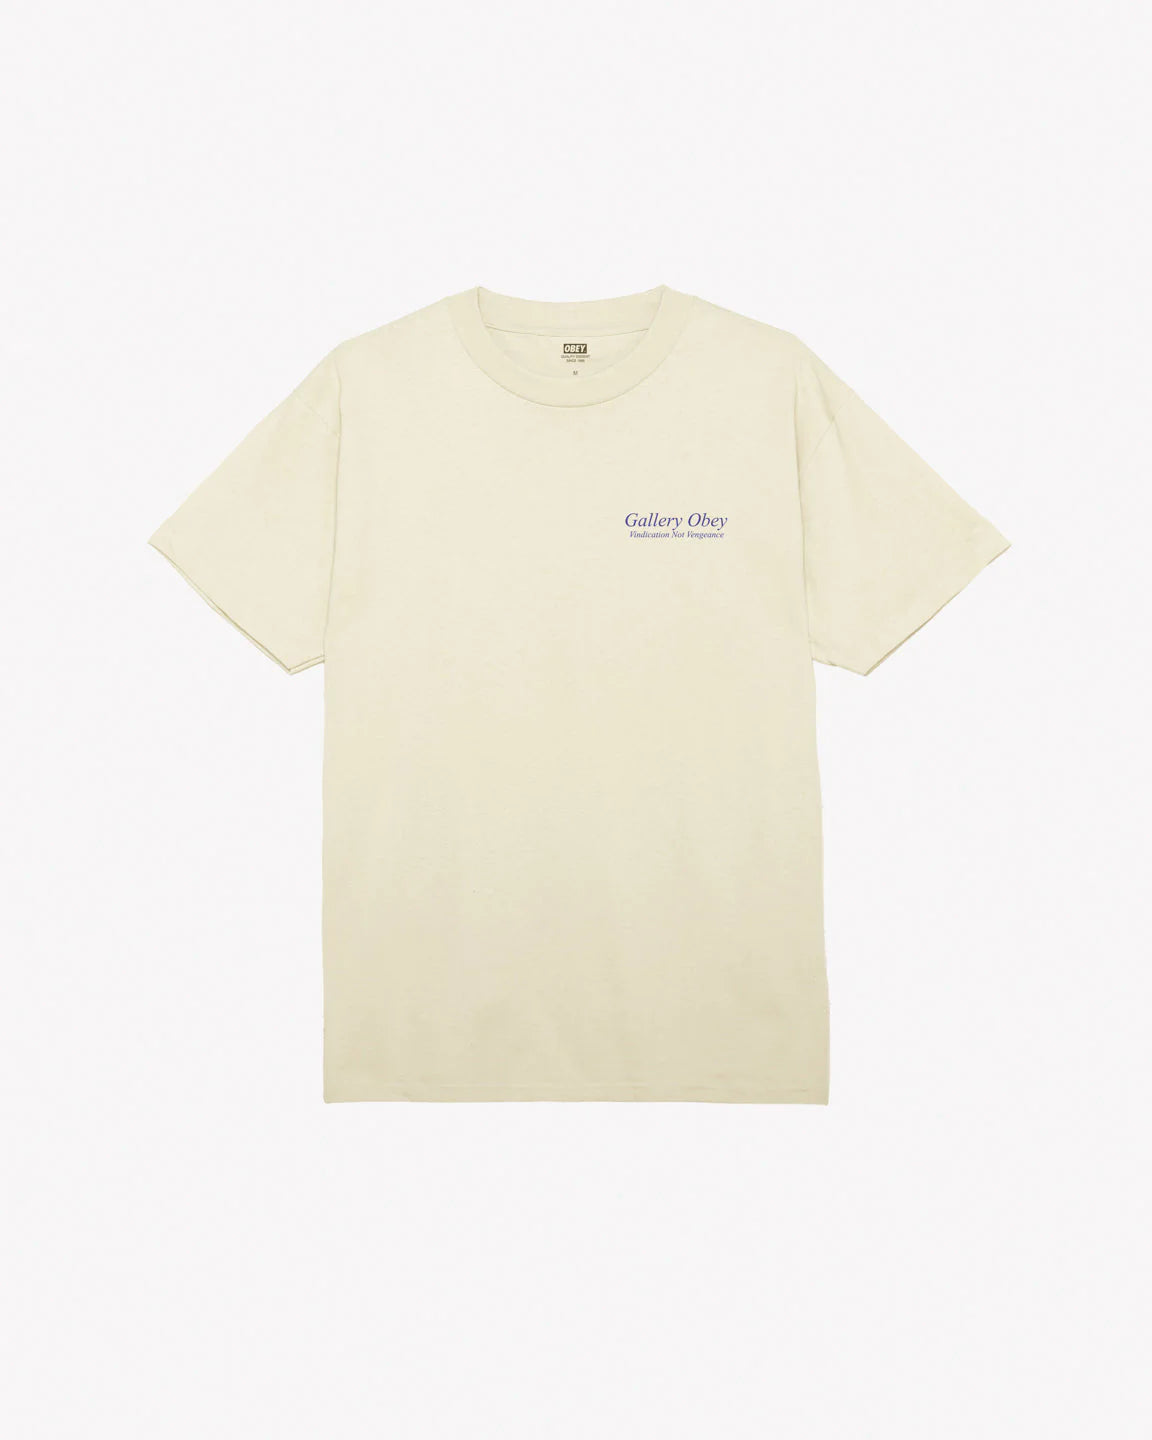 OBEY GALLERY OBEY CLASSIC T-SHIRT - Cream